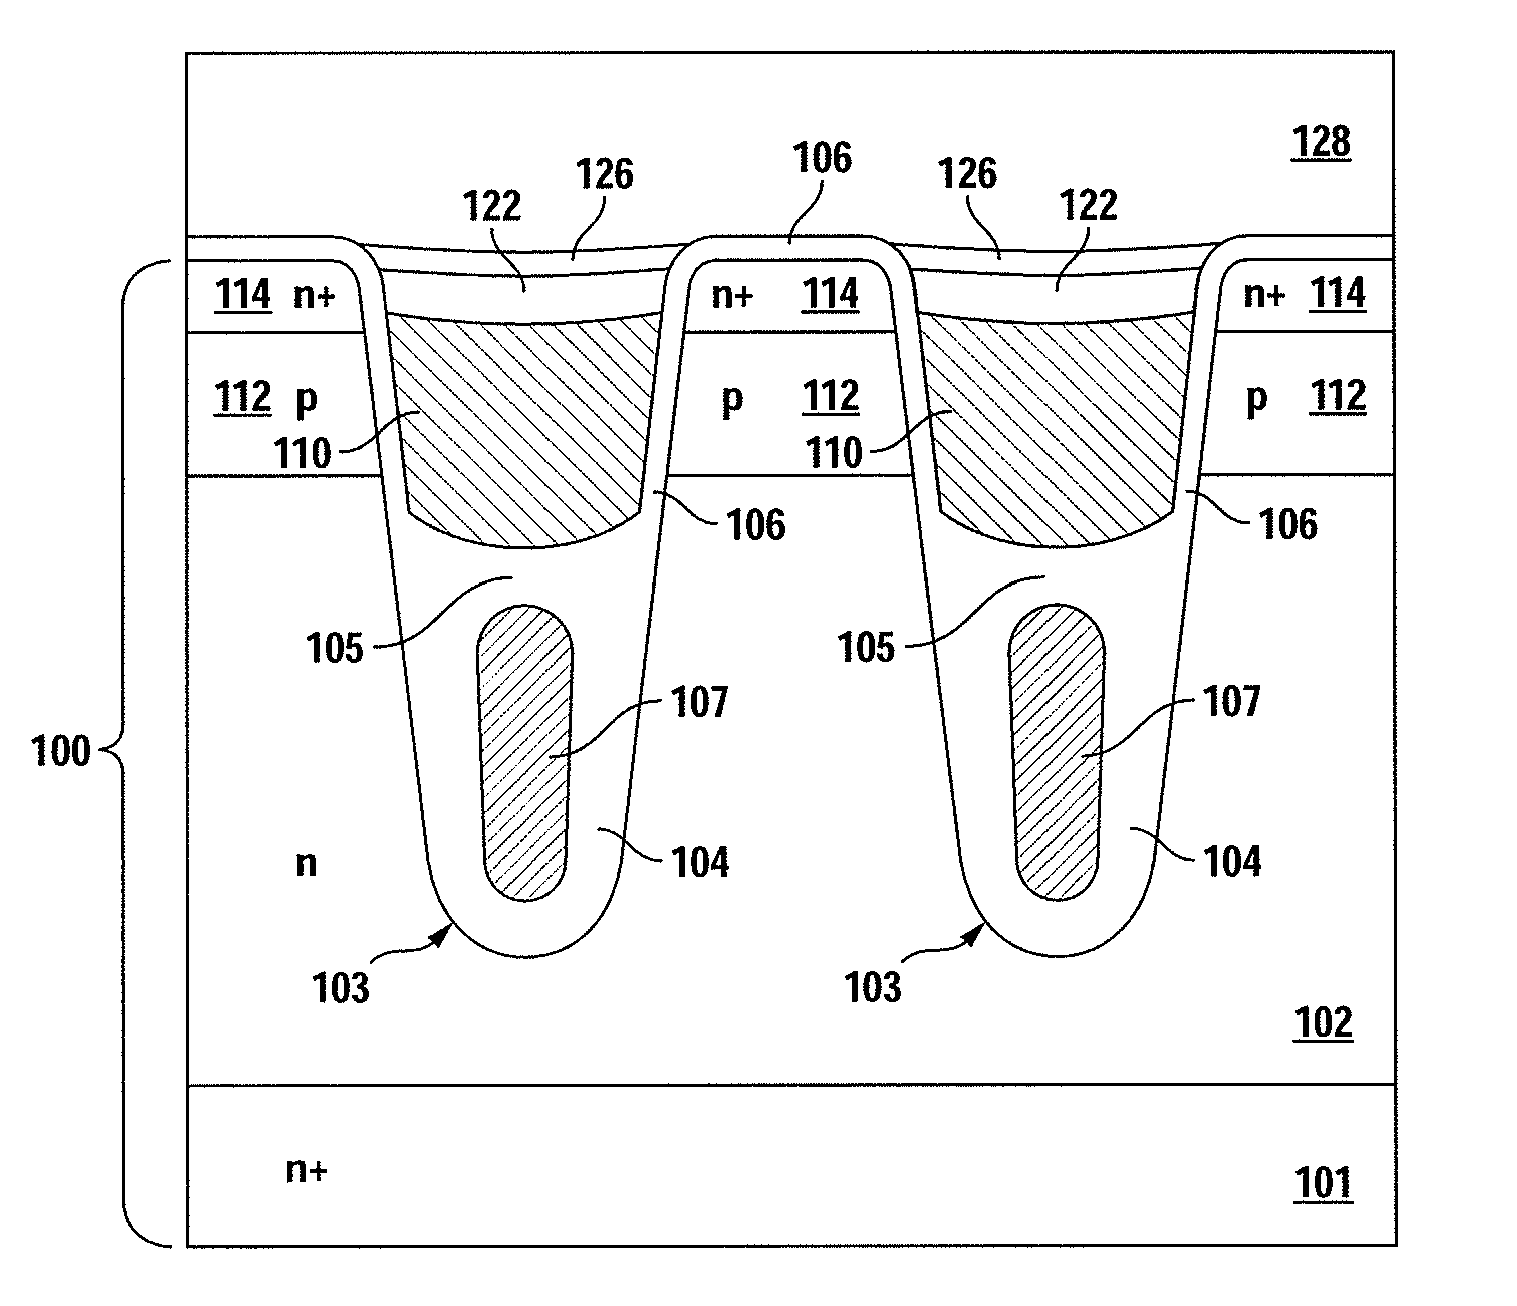 Structure and Method for Forming a Salicide on the Gate Electrode of a Trench-Gate FET